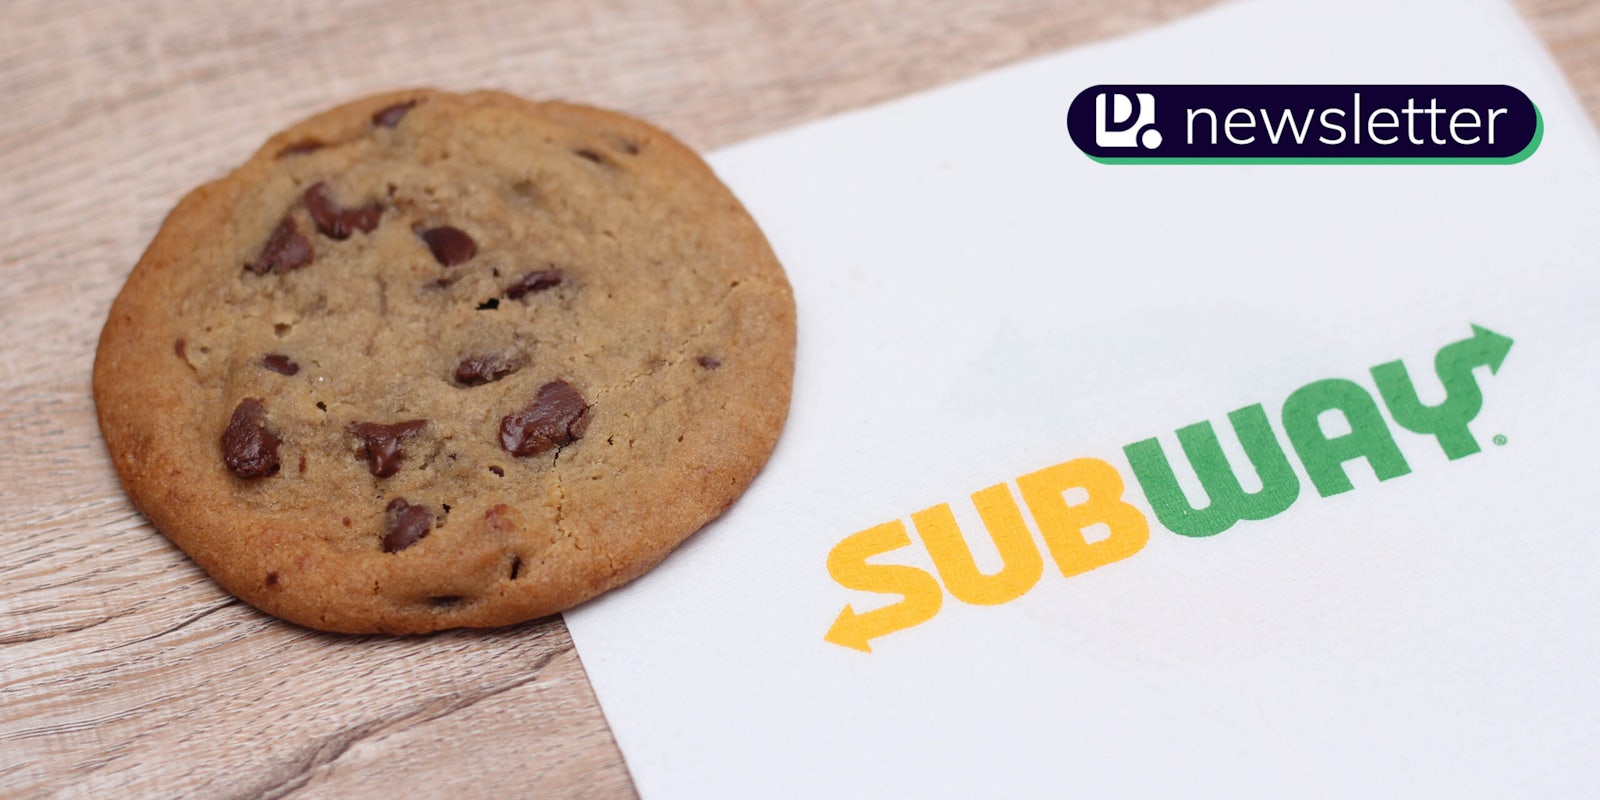 A Subway napkin and cookie.